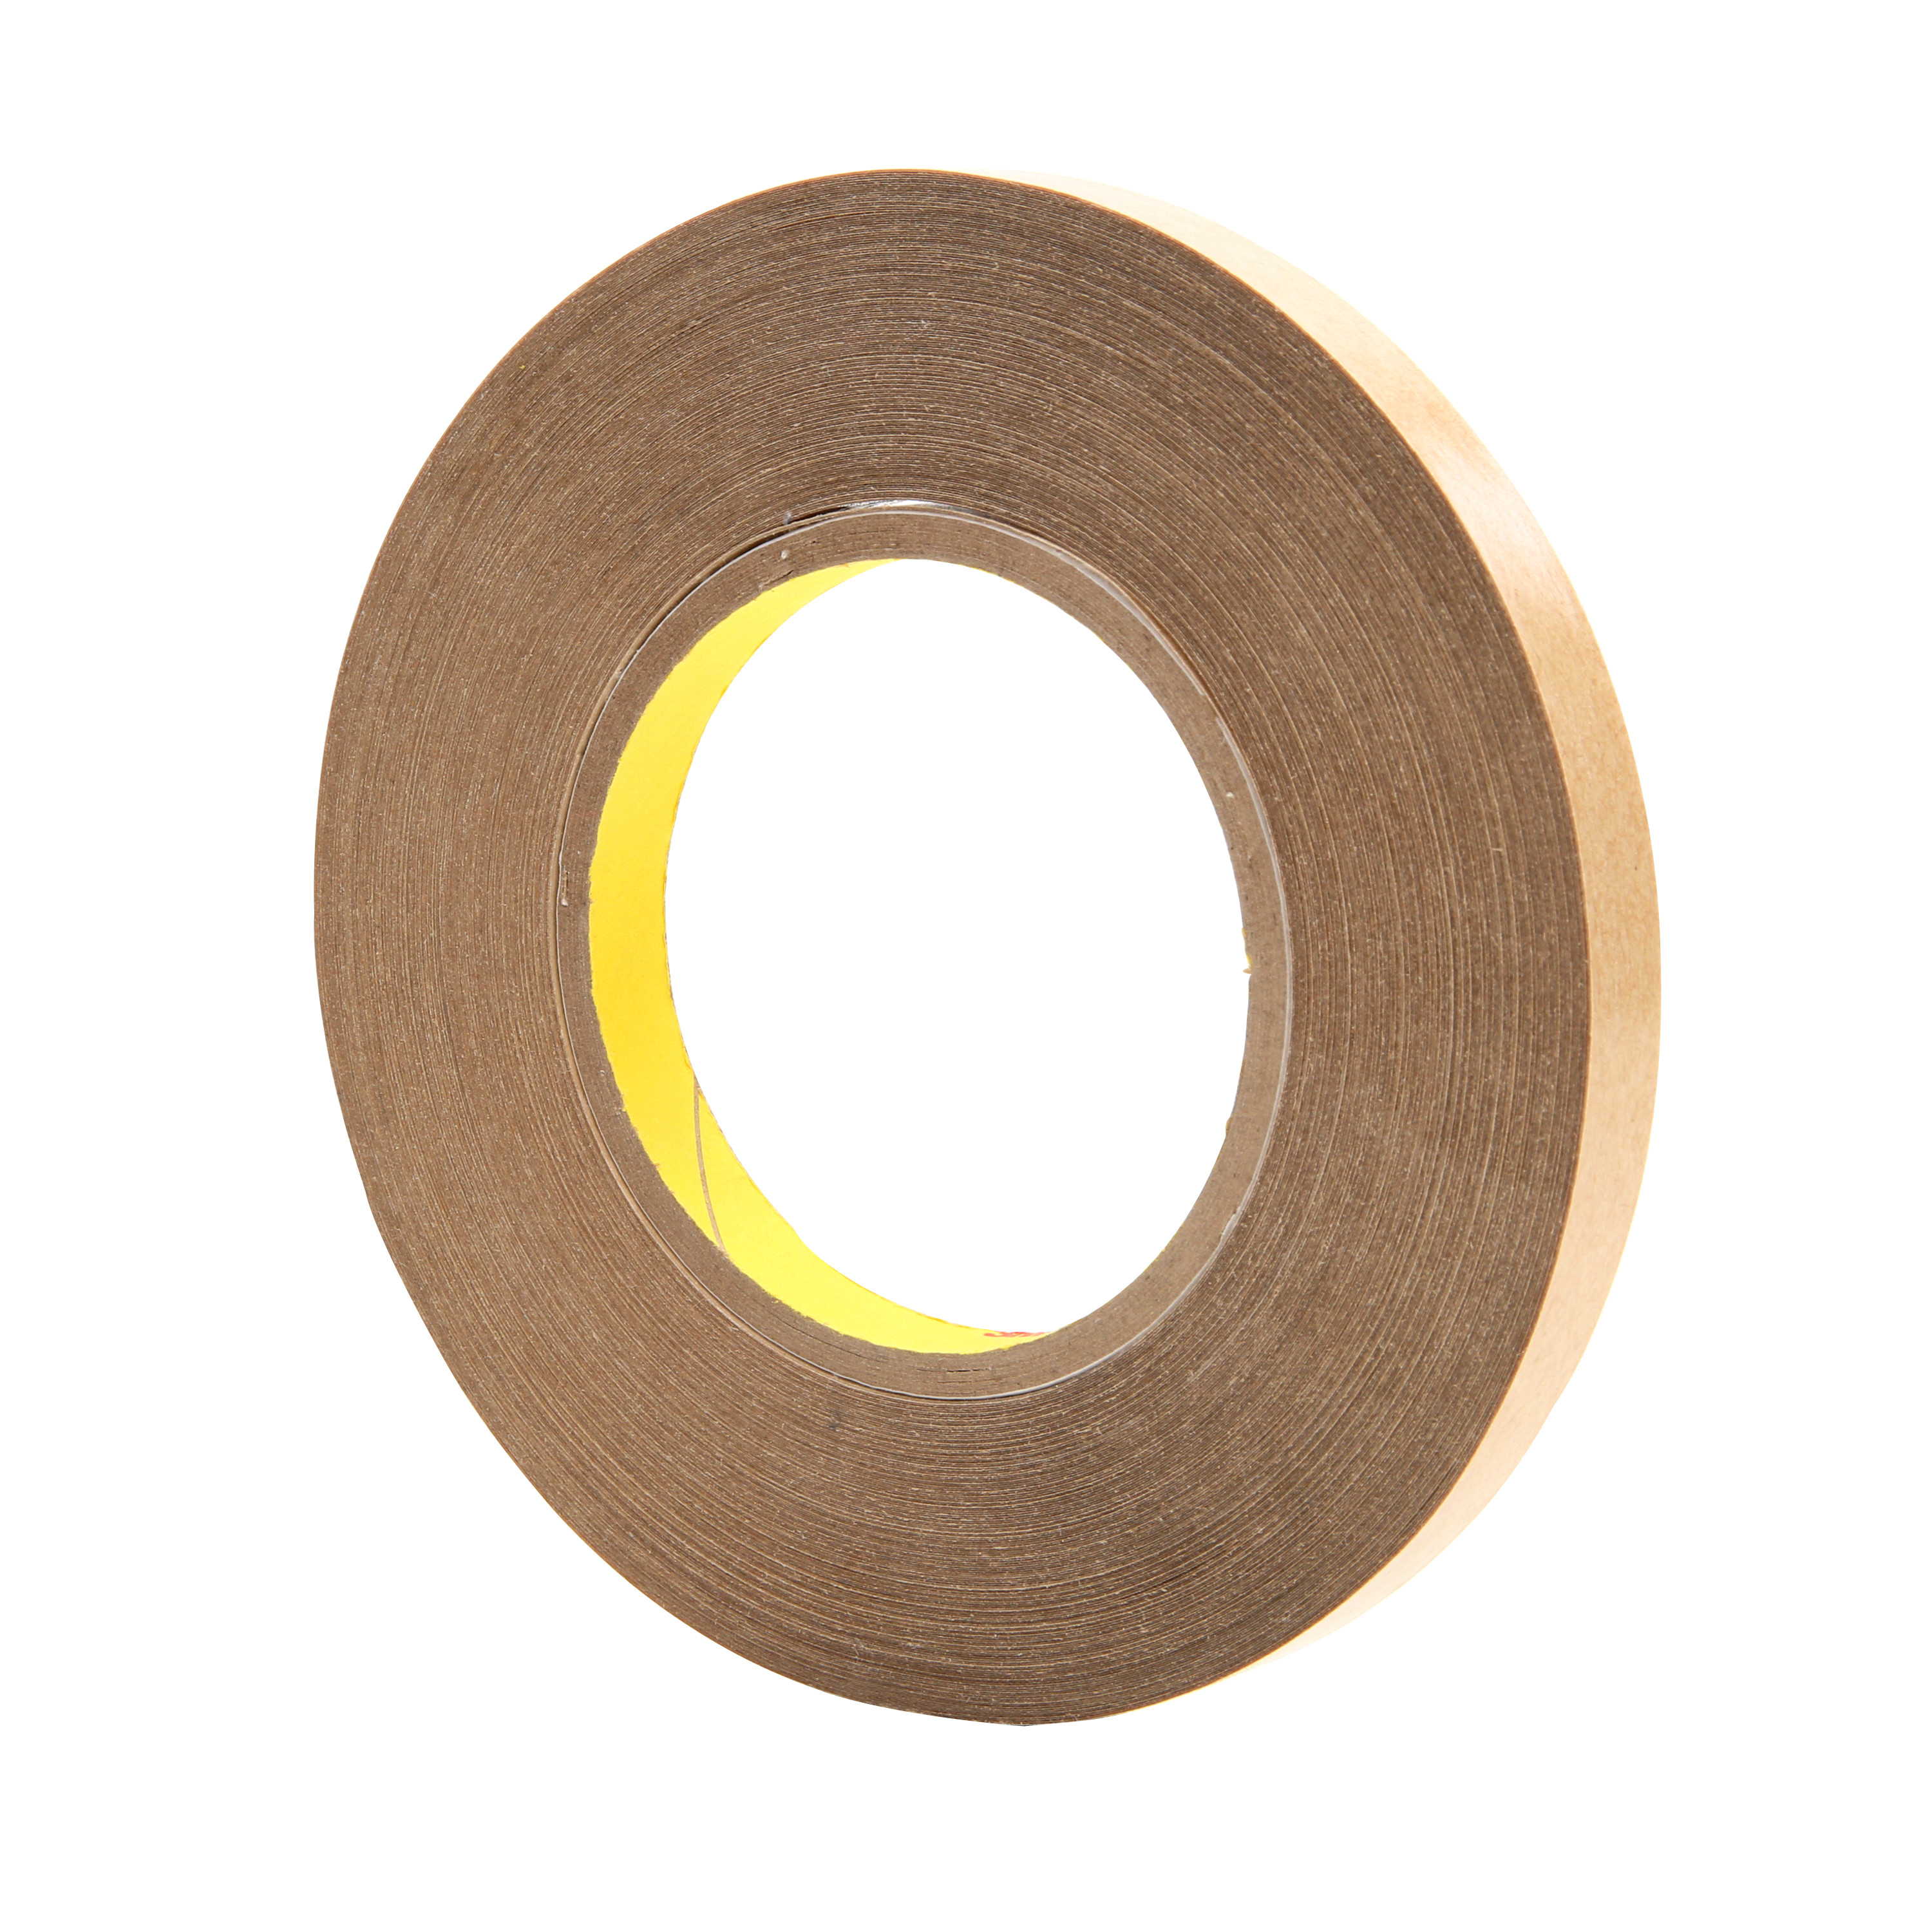 Product Number 950 | 3M™ Adhesive Transfer Tape 950